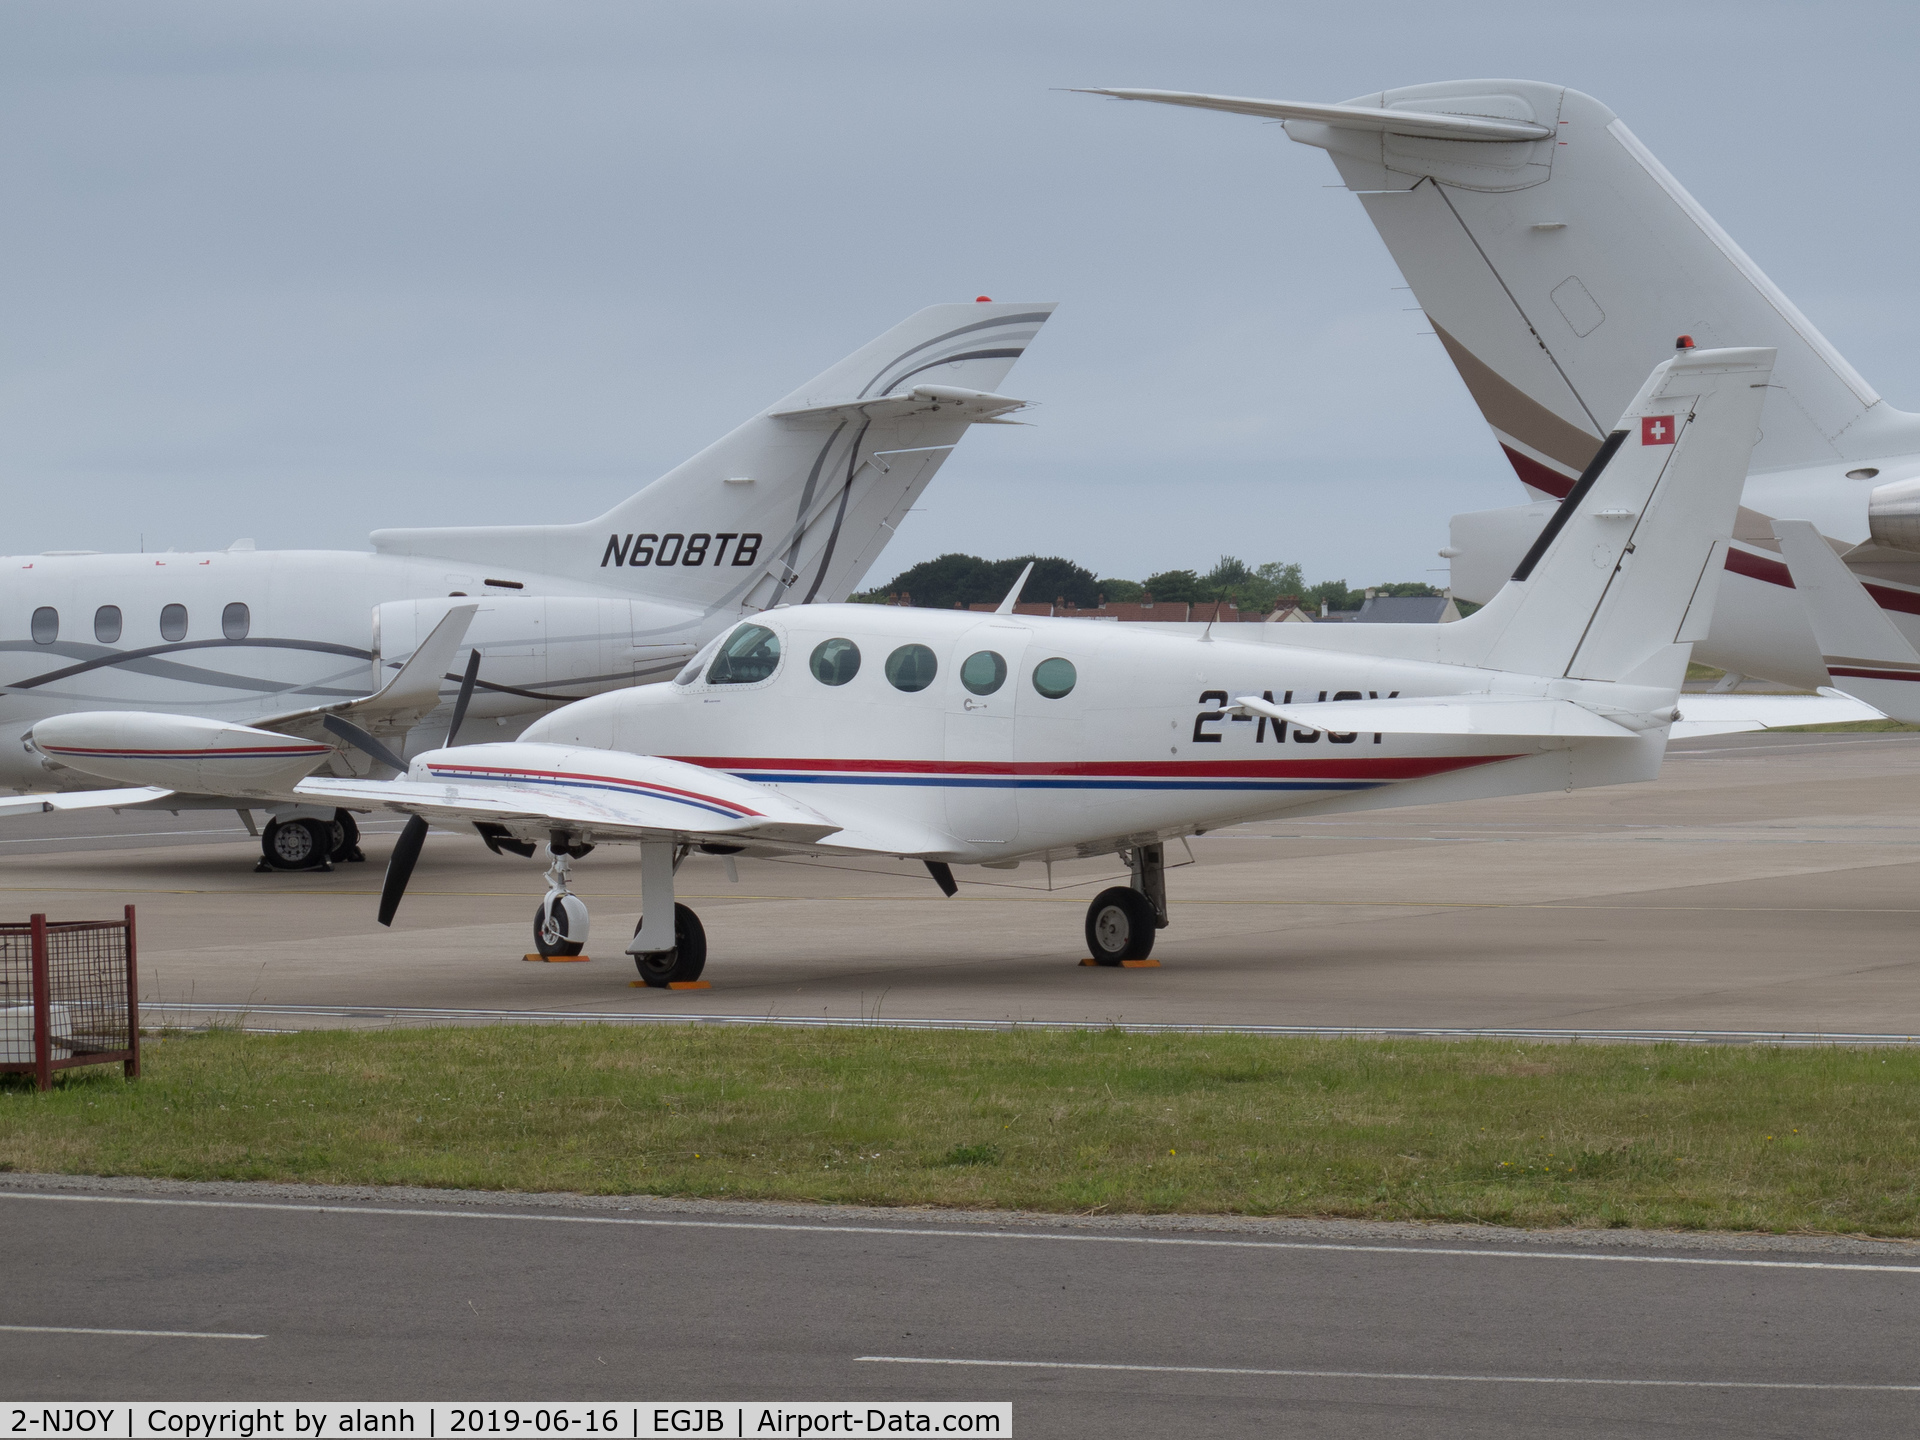 2-NJOY, 1979 Cessna 335 C/N 335-0030, Parked outside ASG, Guernsey